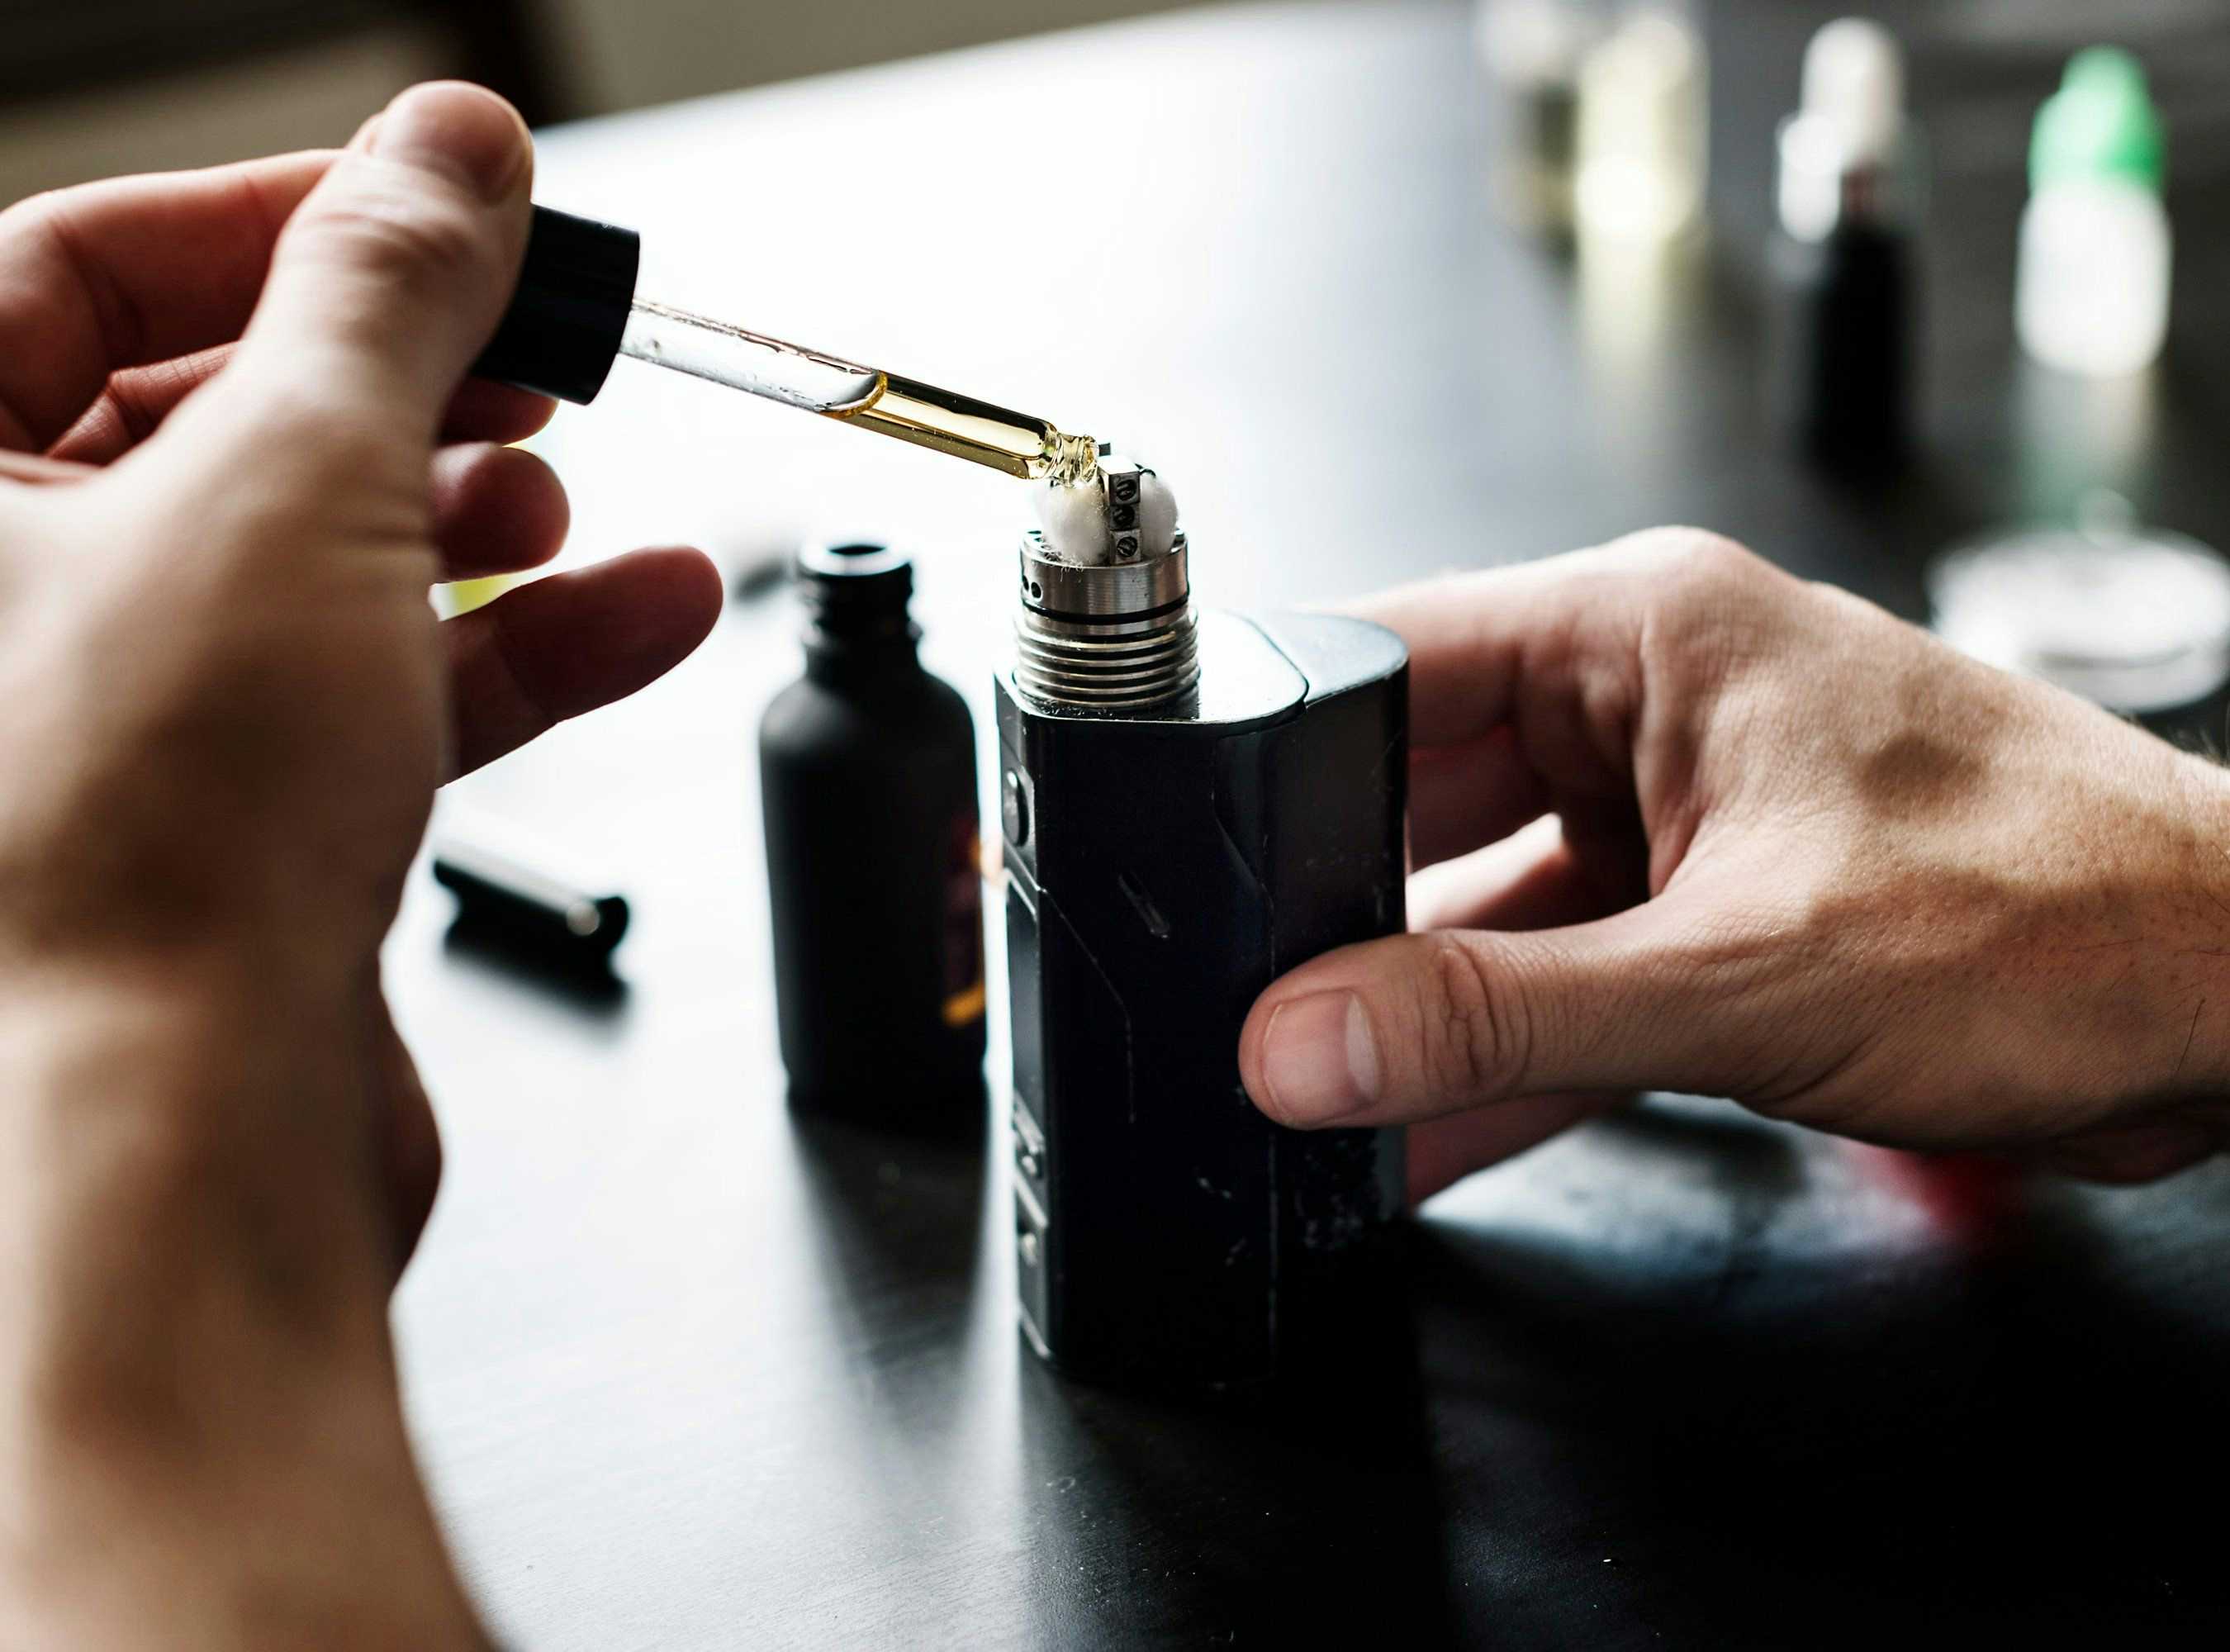 Cannabis Vaping Linked to Serious Lung Injuries – Is a Product Liability Suit Next?